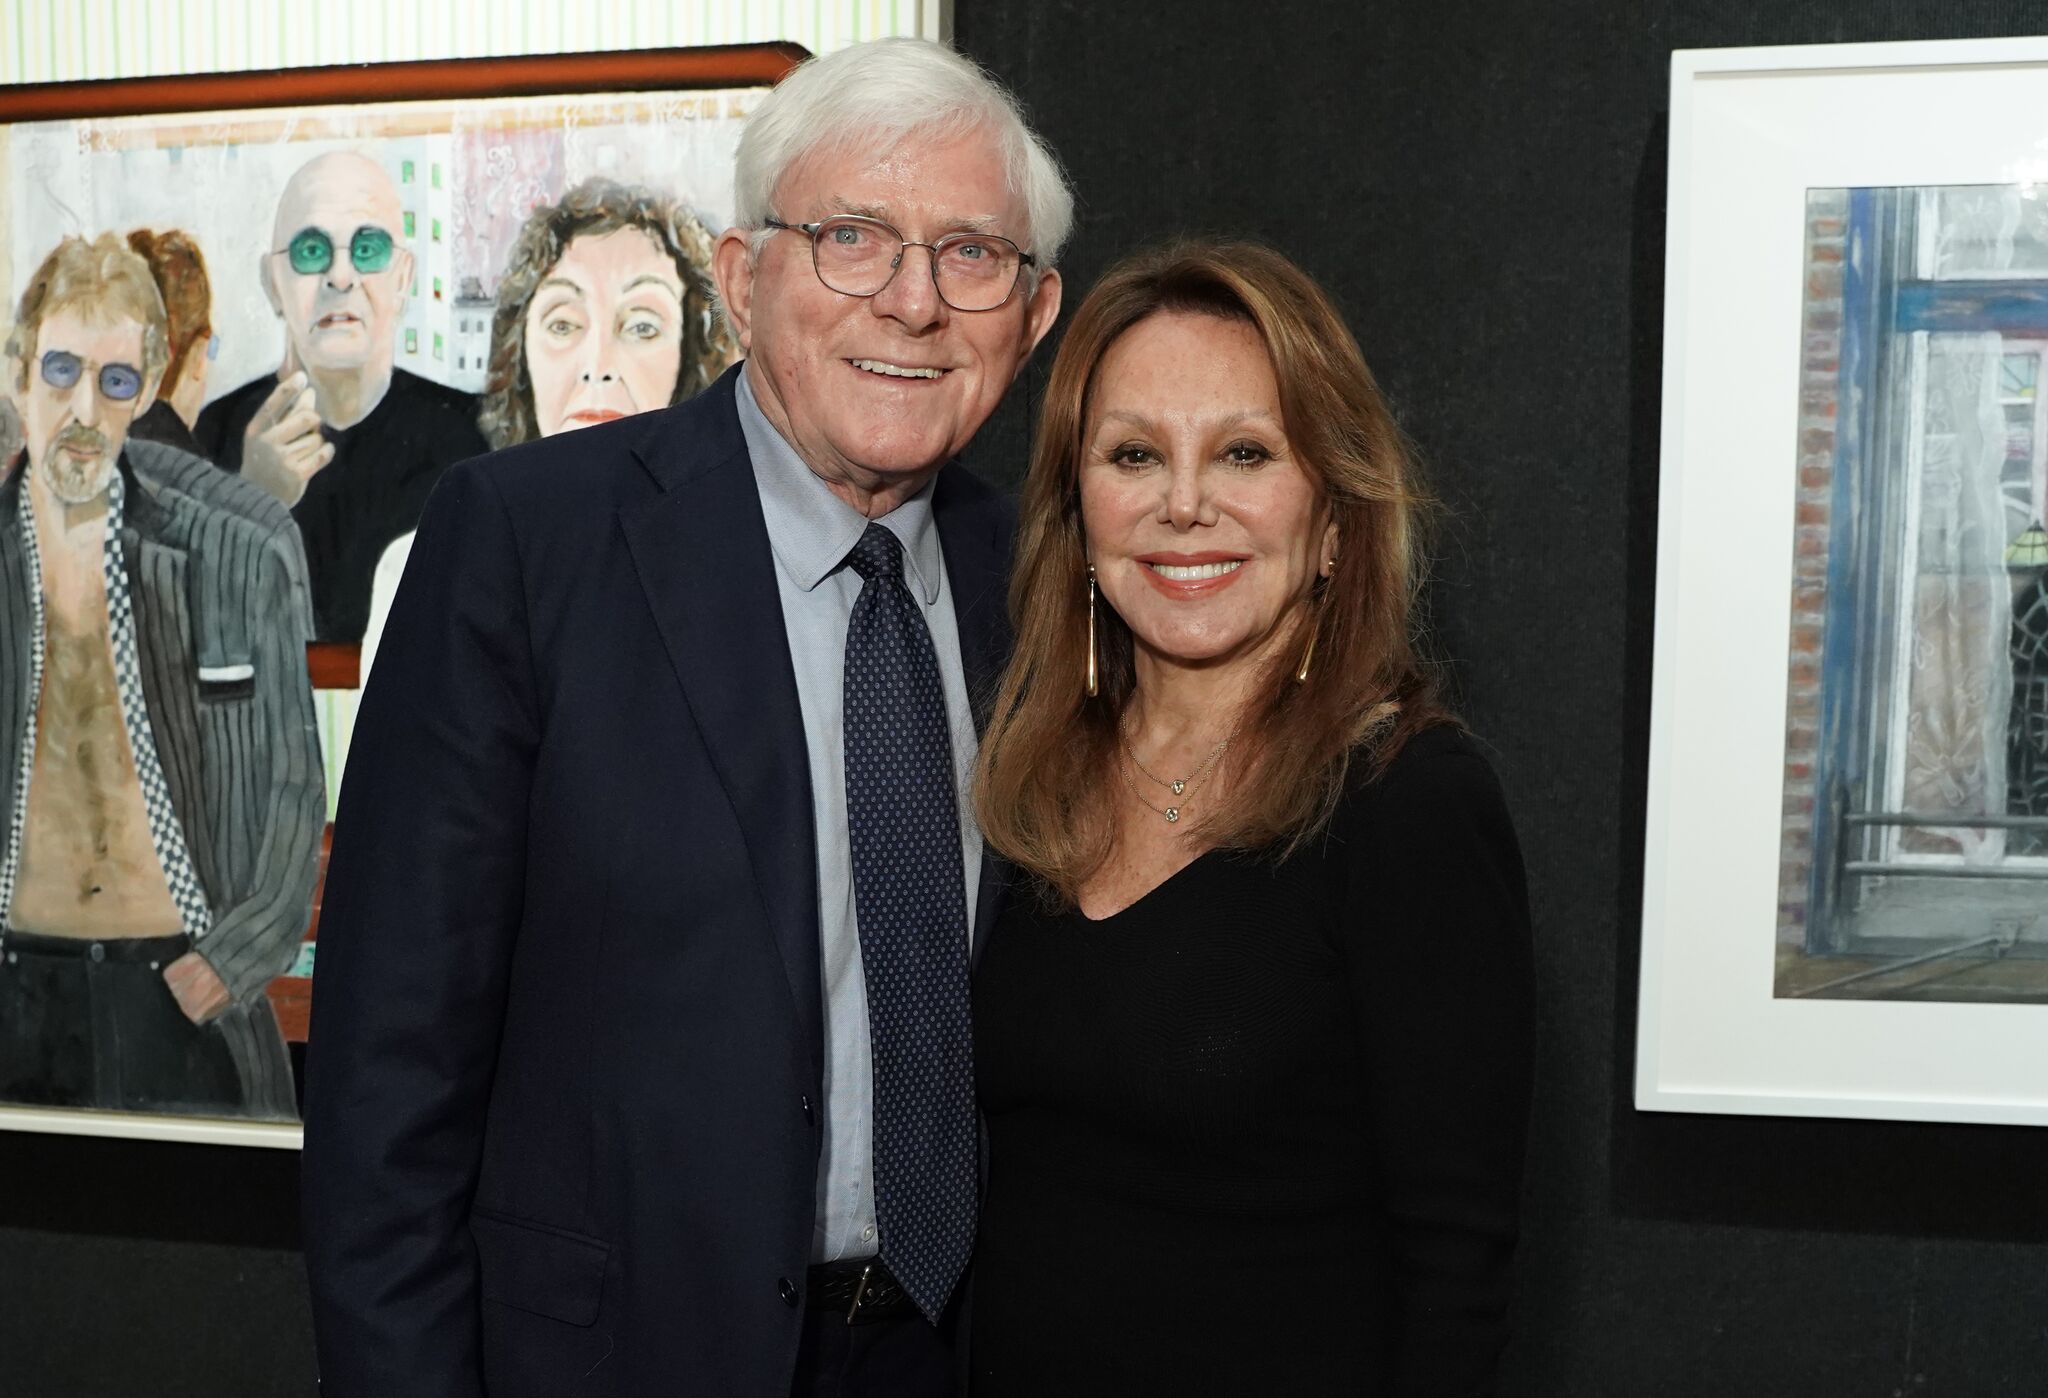 Phil Donahue and Marlo Thomas attend Joseph Fioretti exhibition at The National Arts Club | Getty Images